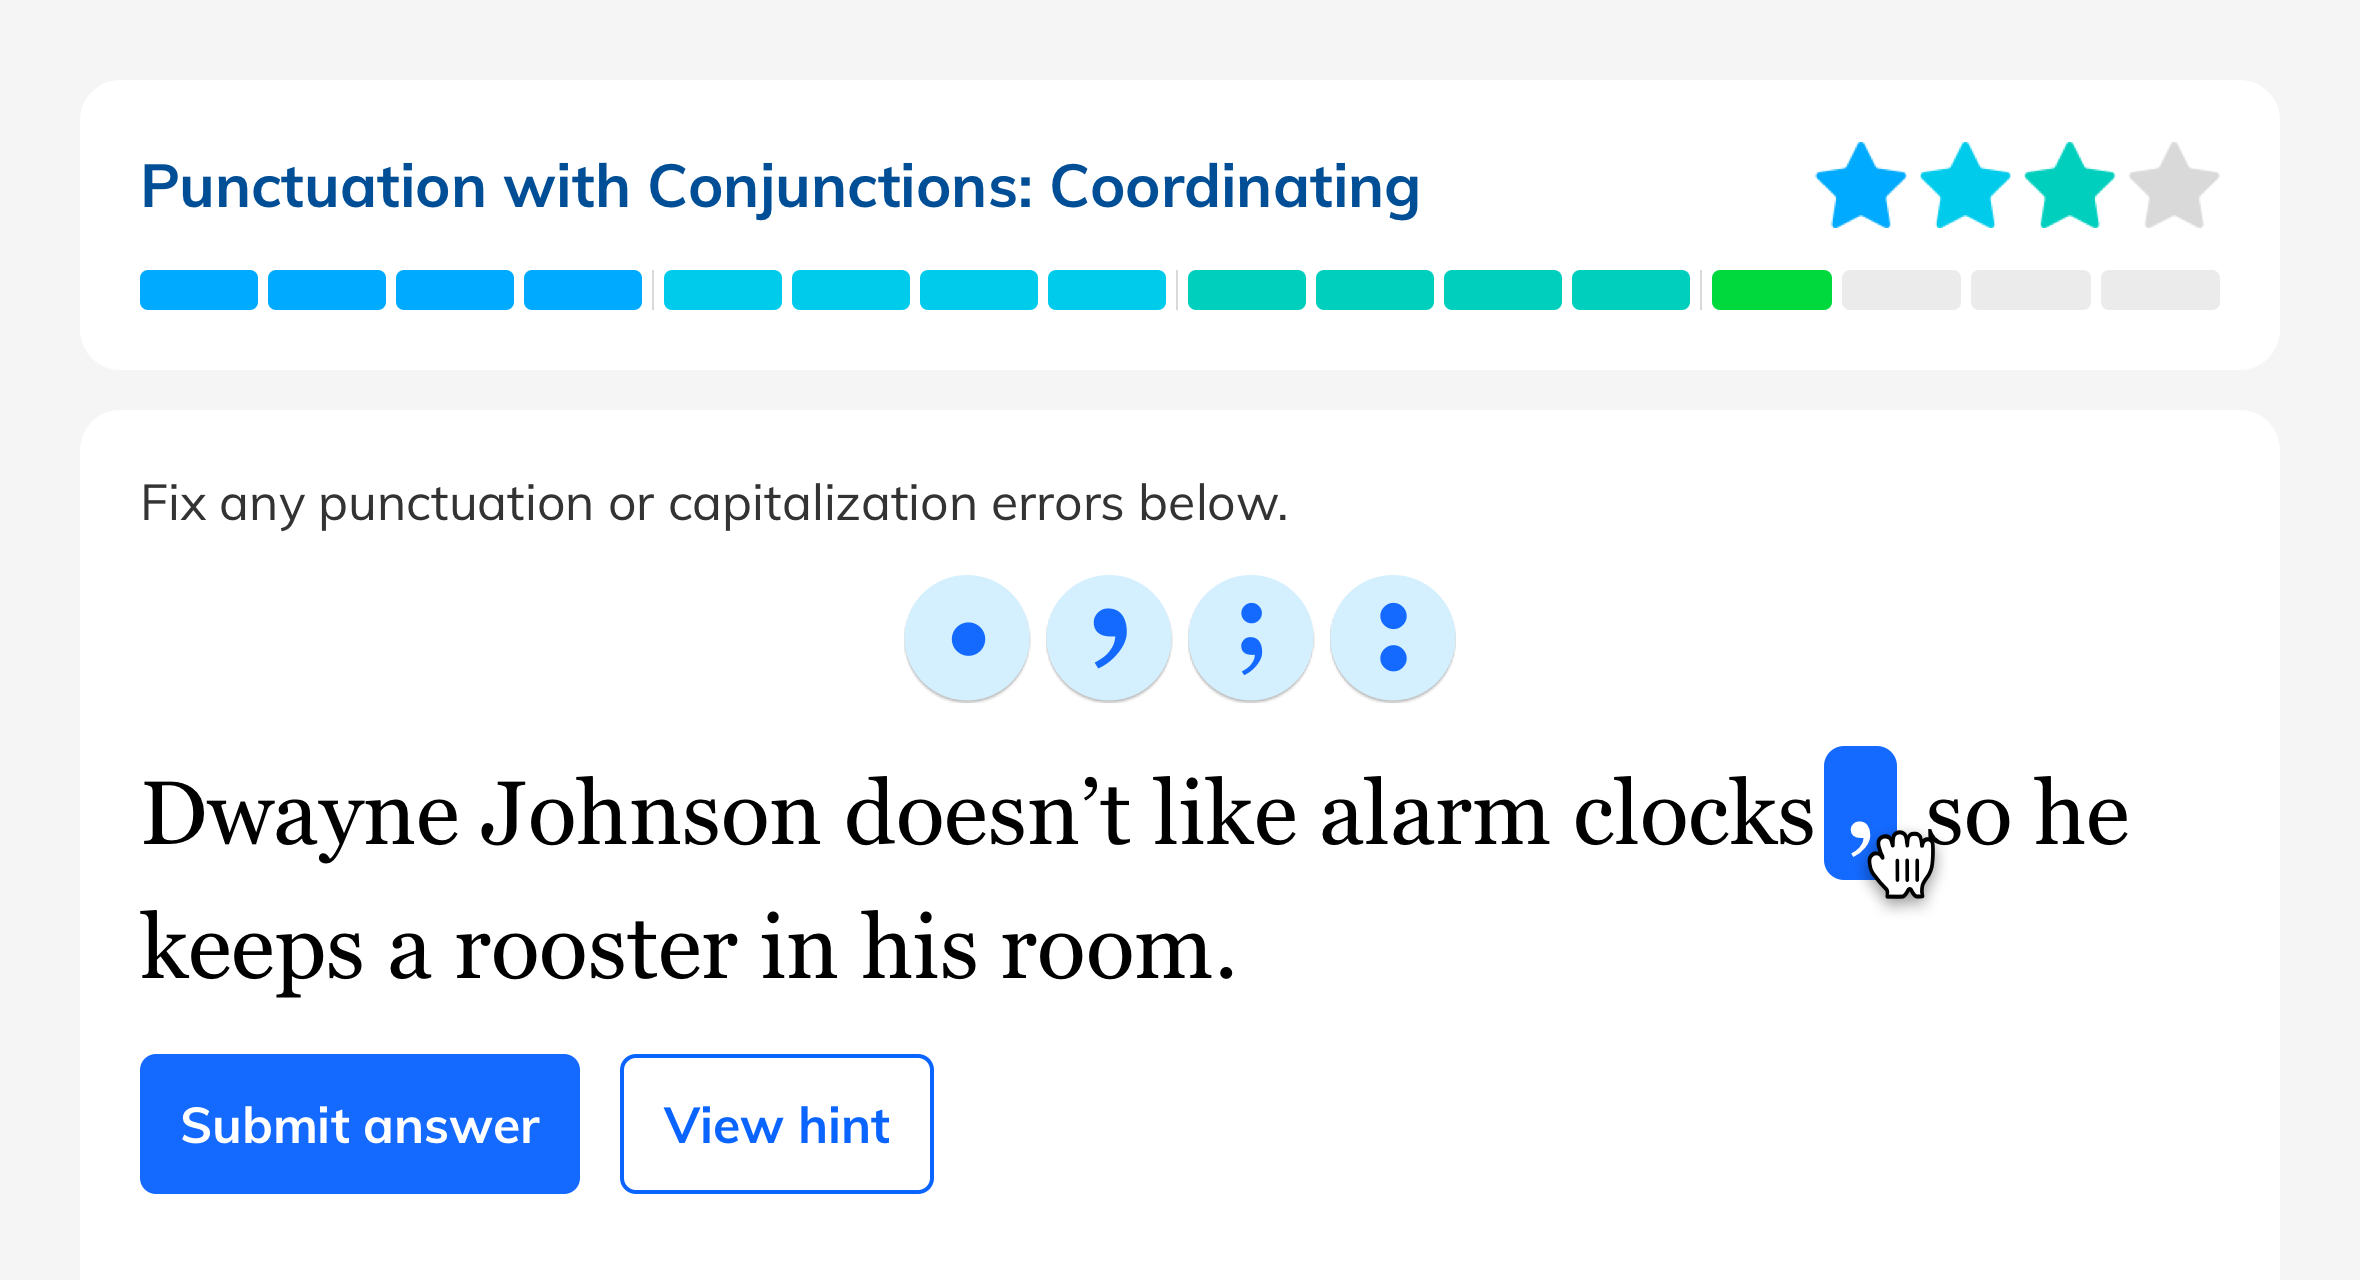 To practice topics such as "Punctuation with Conjunctions," students drag punctuation marks in and out of fun sentences like "Dwayne Johnson doesn't like alarm clocks, so he keeps a rooster in his room."